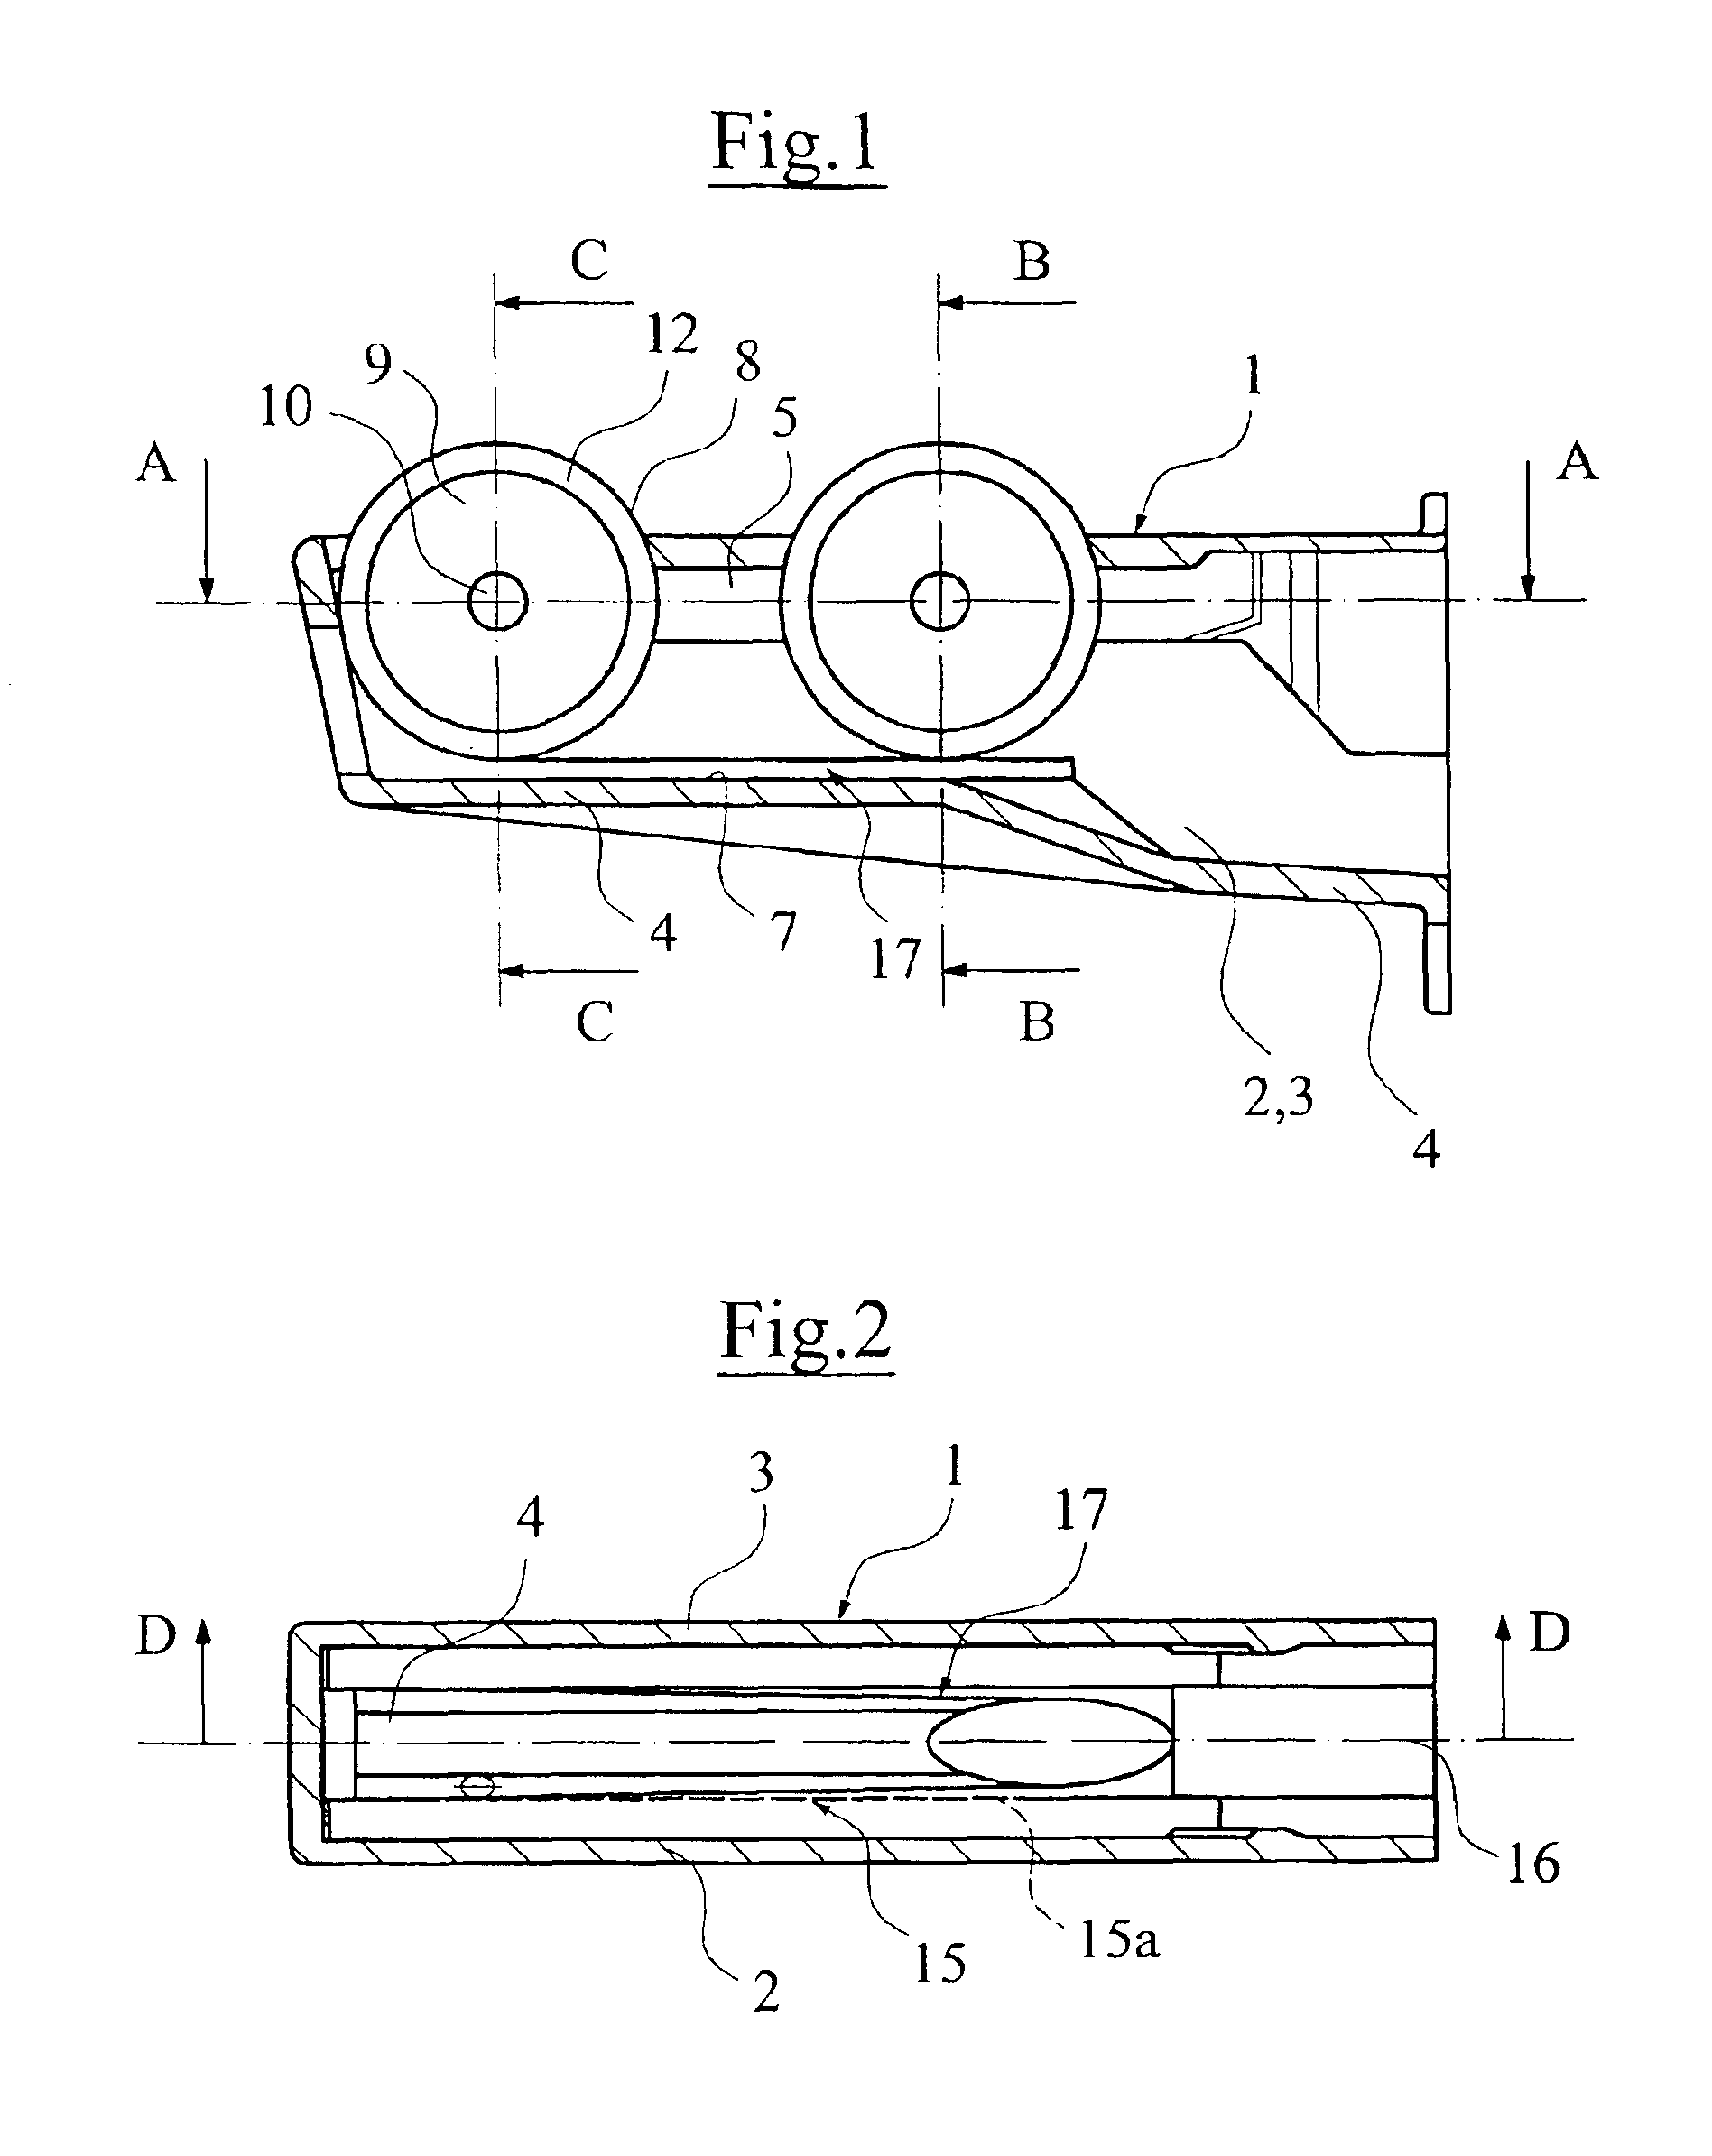 Roller pincher for setting the regulation cross-section of a flexible tubing